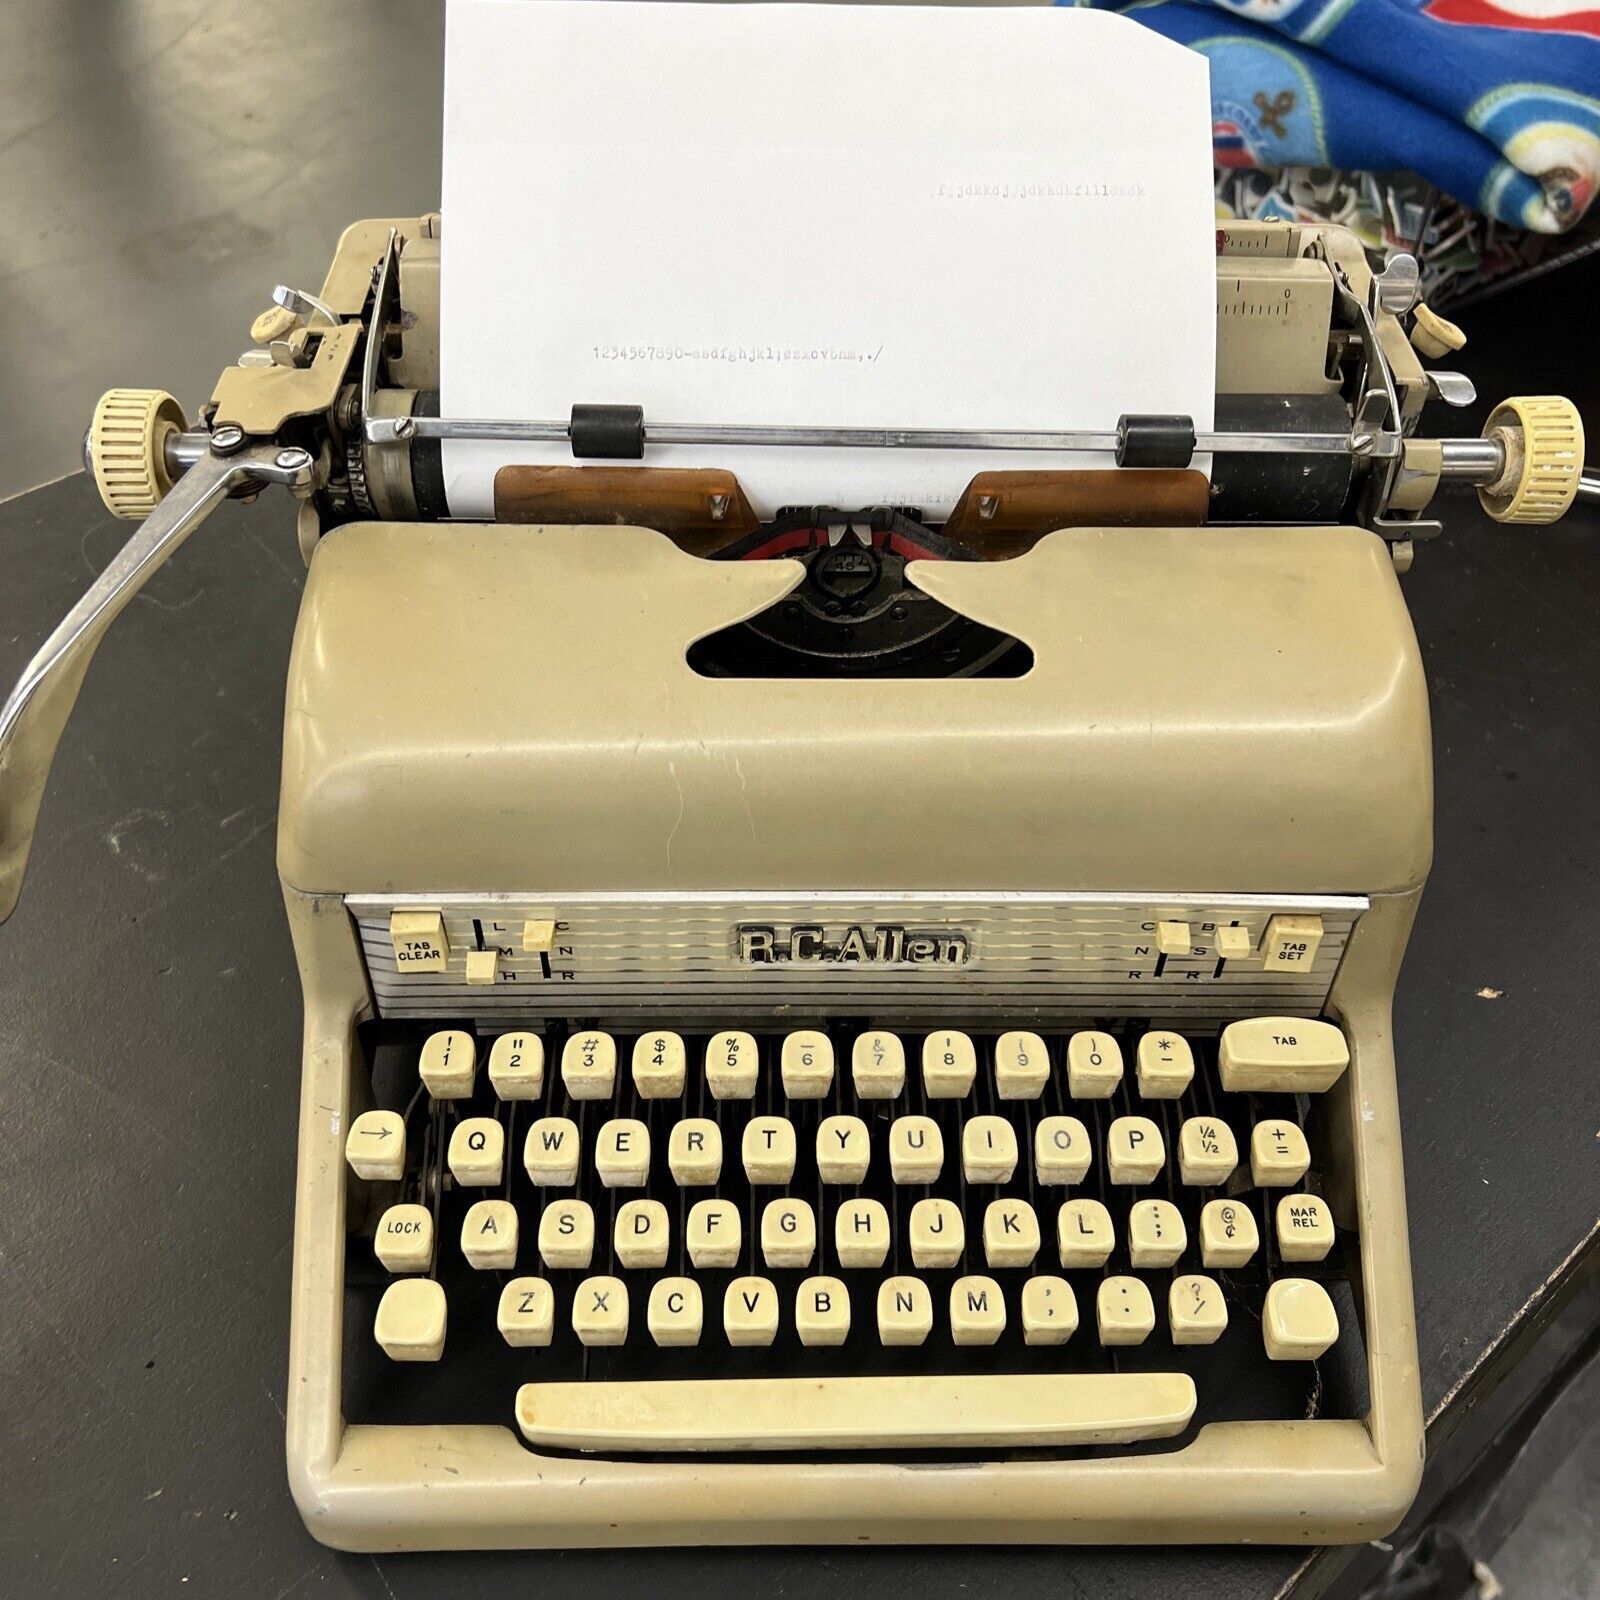 1960's R.C. Allen Typewriter - Keys work - Will need cleaning and service